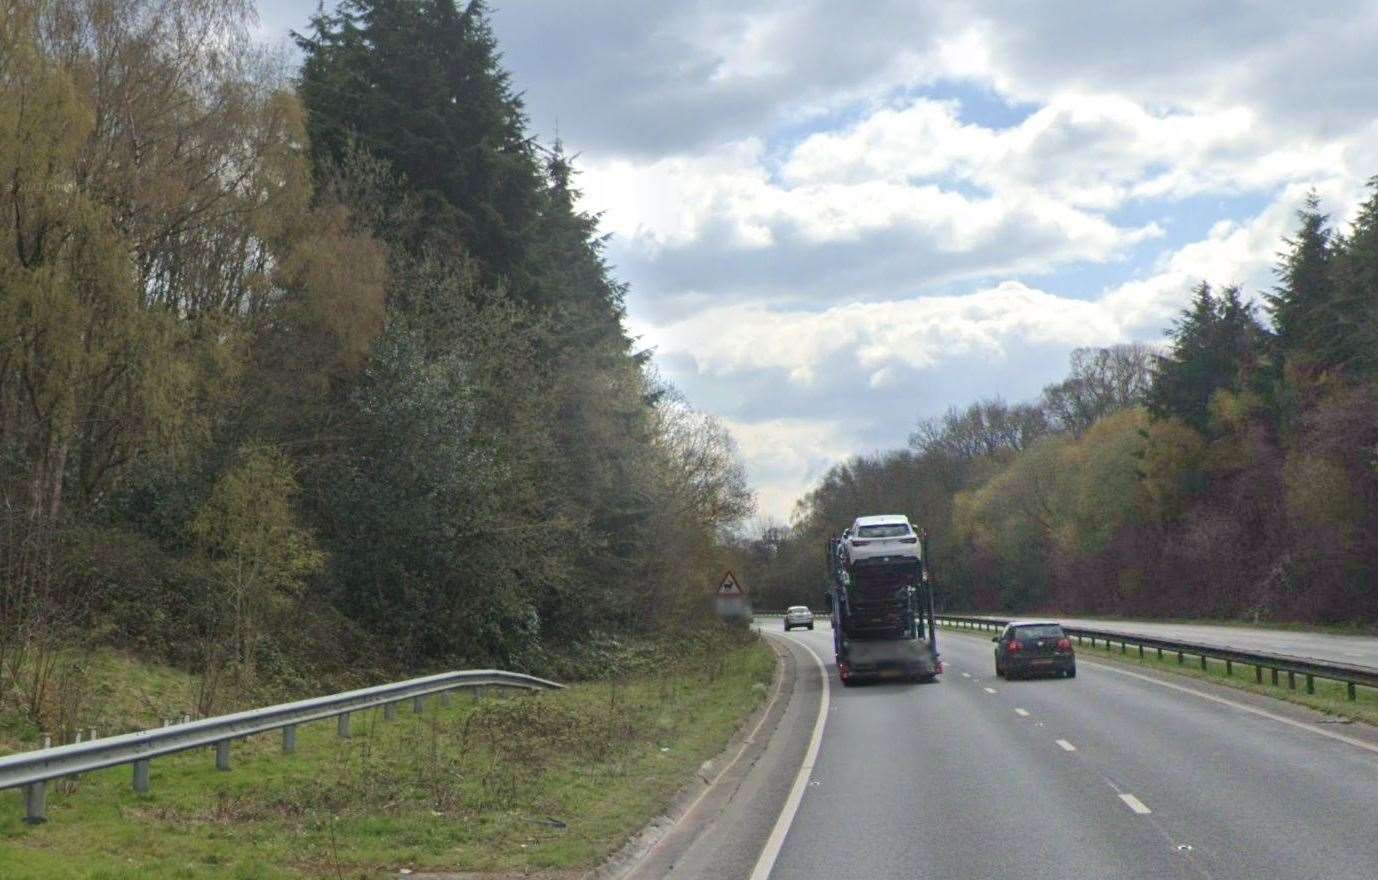 A body has been found in woodland near the A21 near Tunbridge Wells. Picture: Google Images